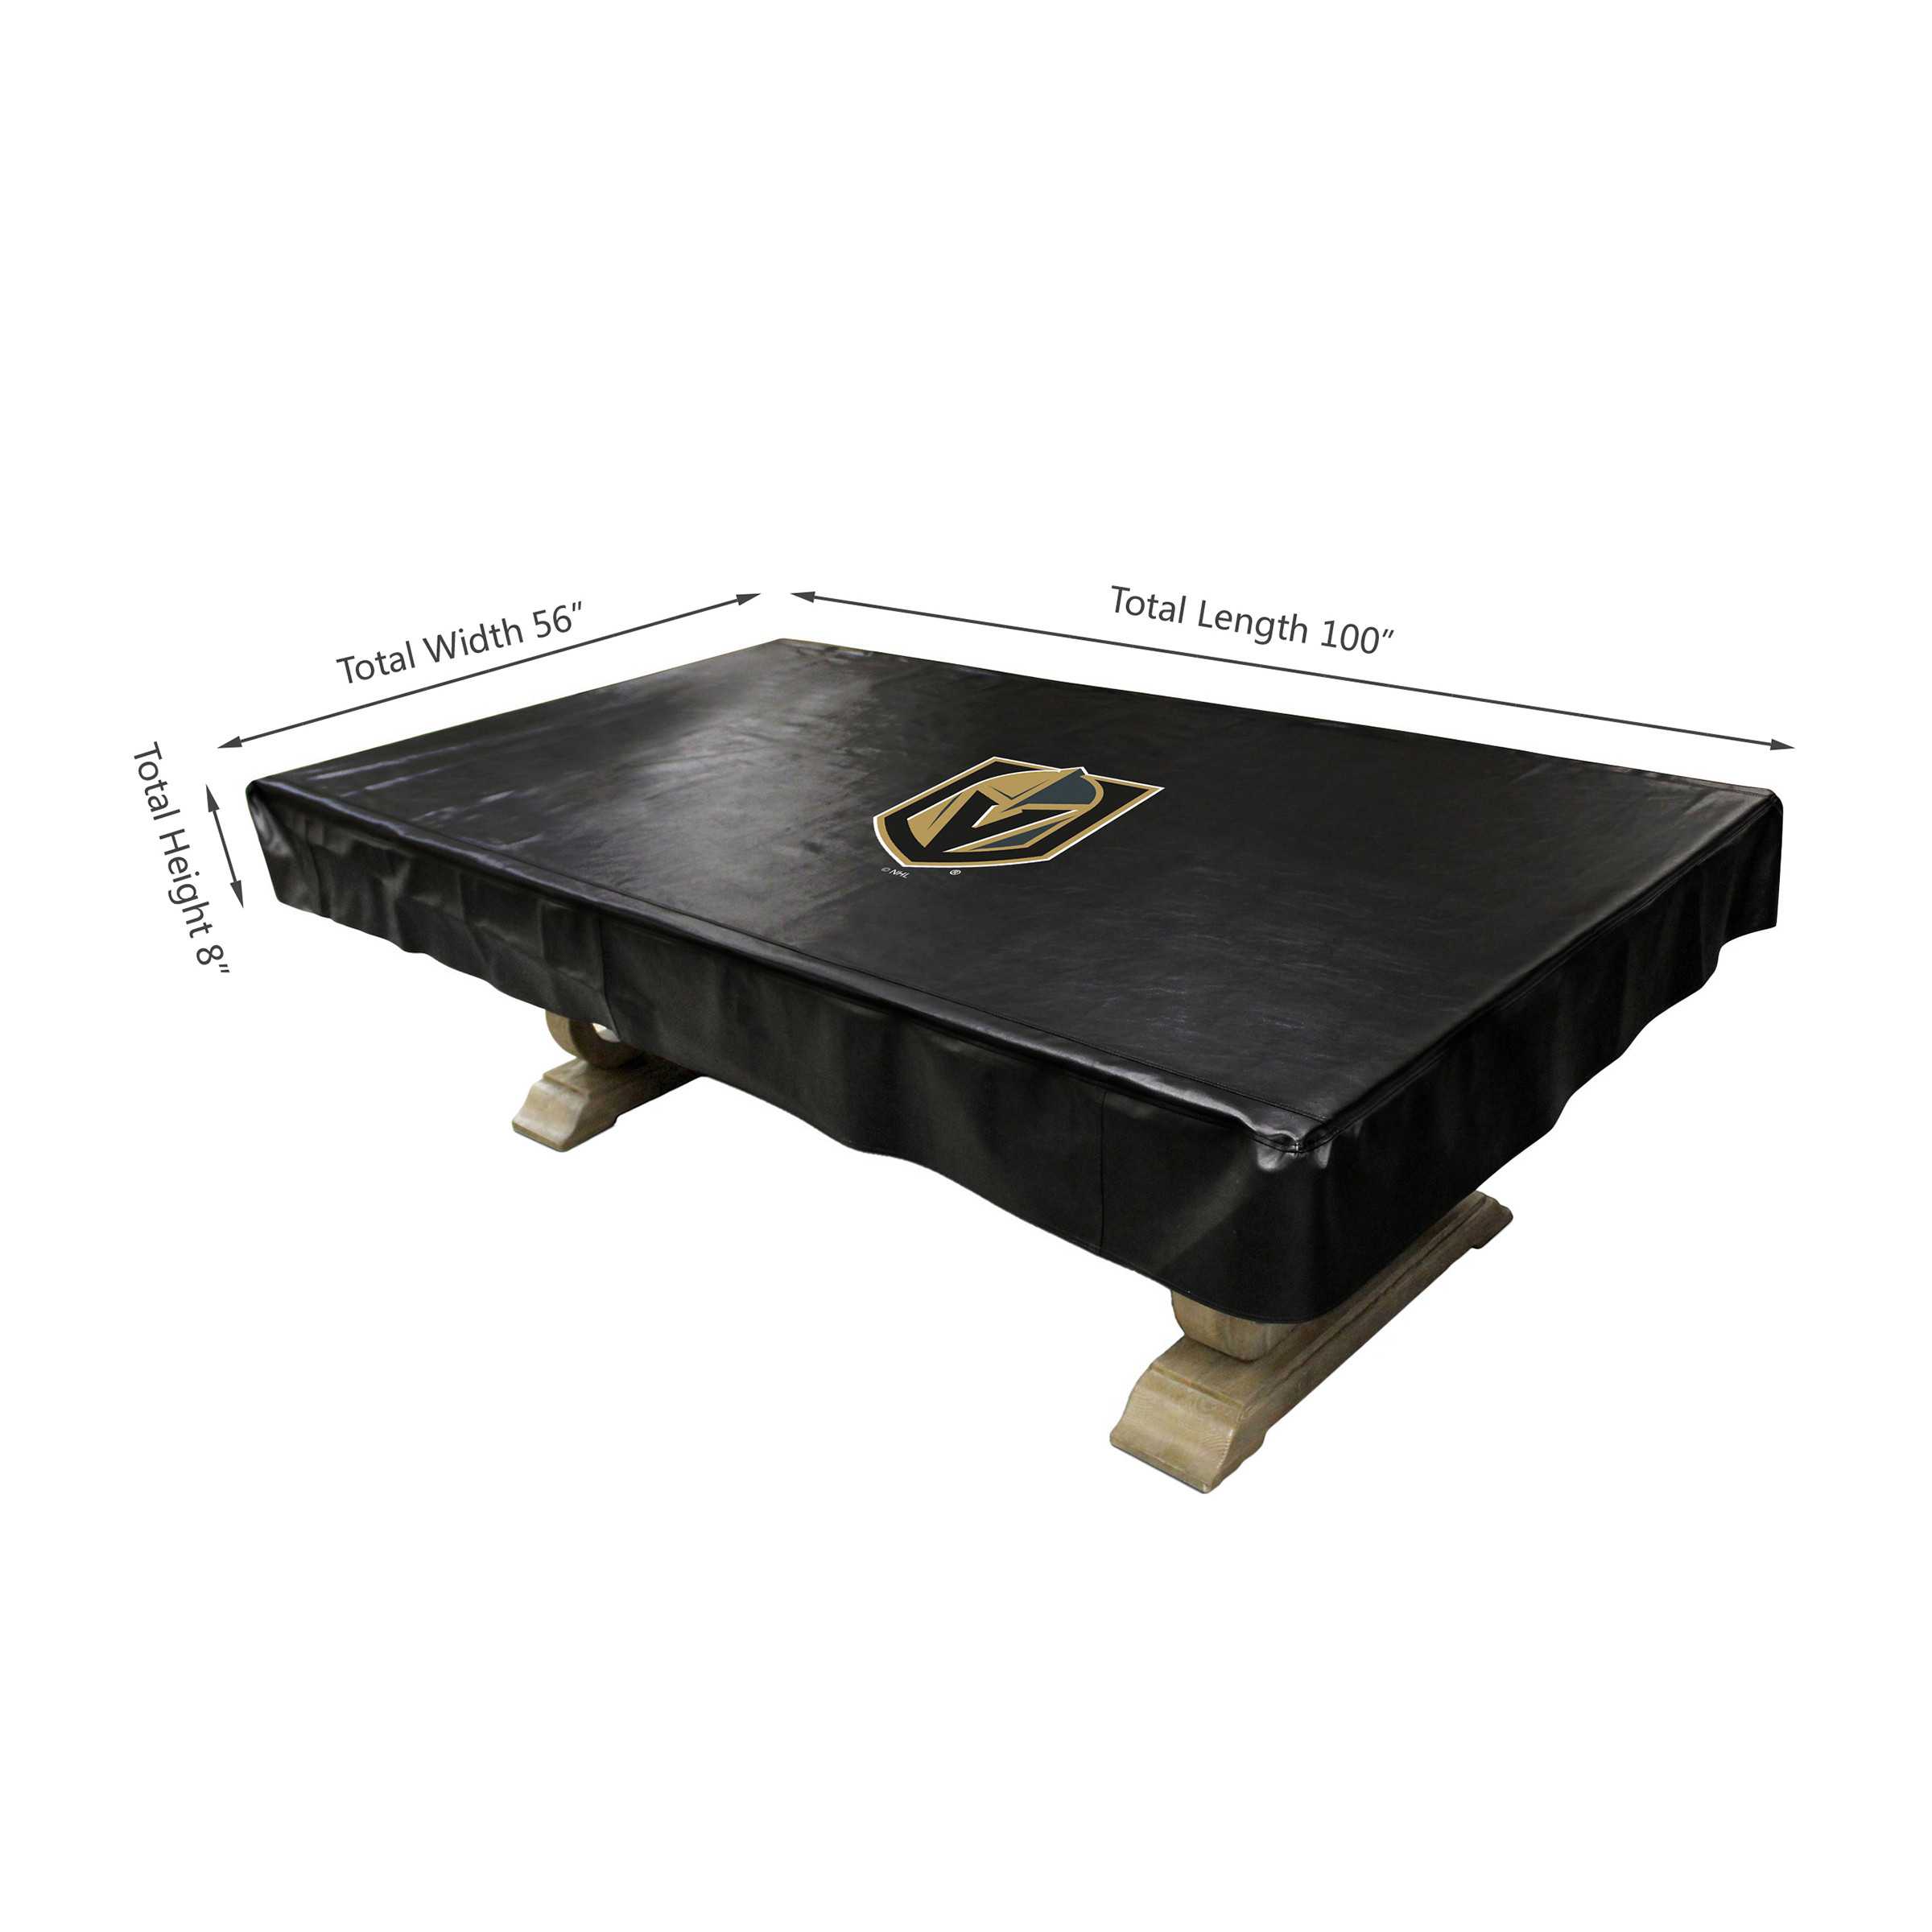 GOLDEN KNIGHTS 8' DELUXE POOL TABLE COVER